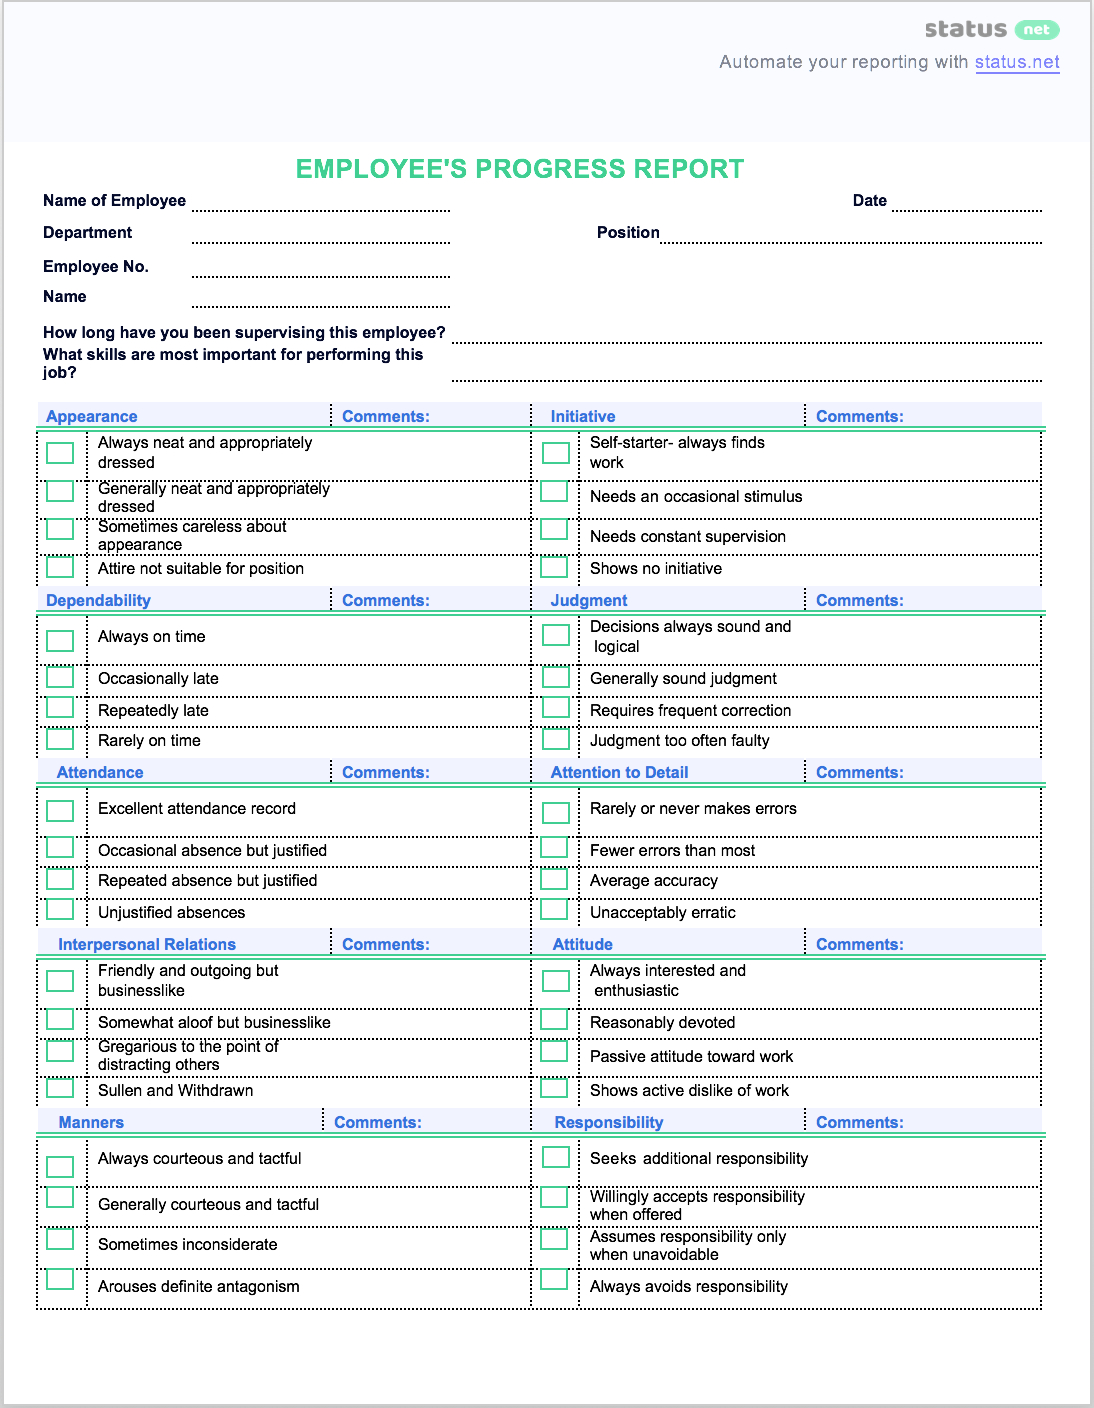 Best Progress Report: How To's + Free Samples [The Complete With Staff Progress Report Template